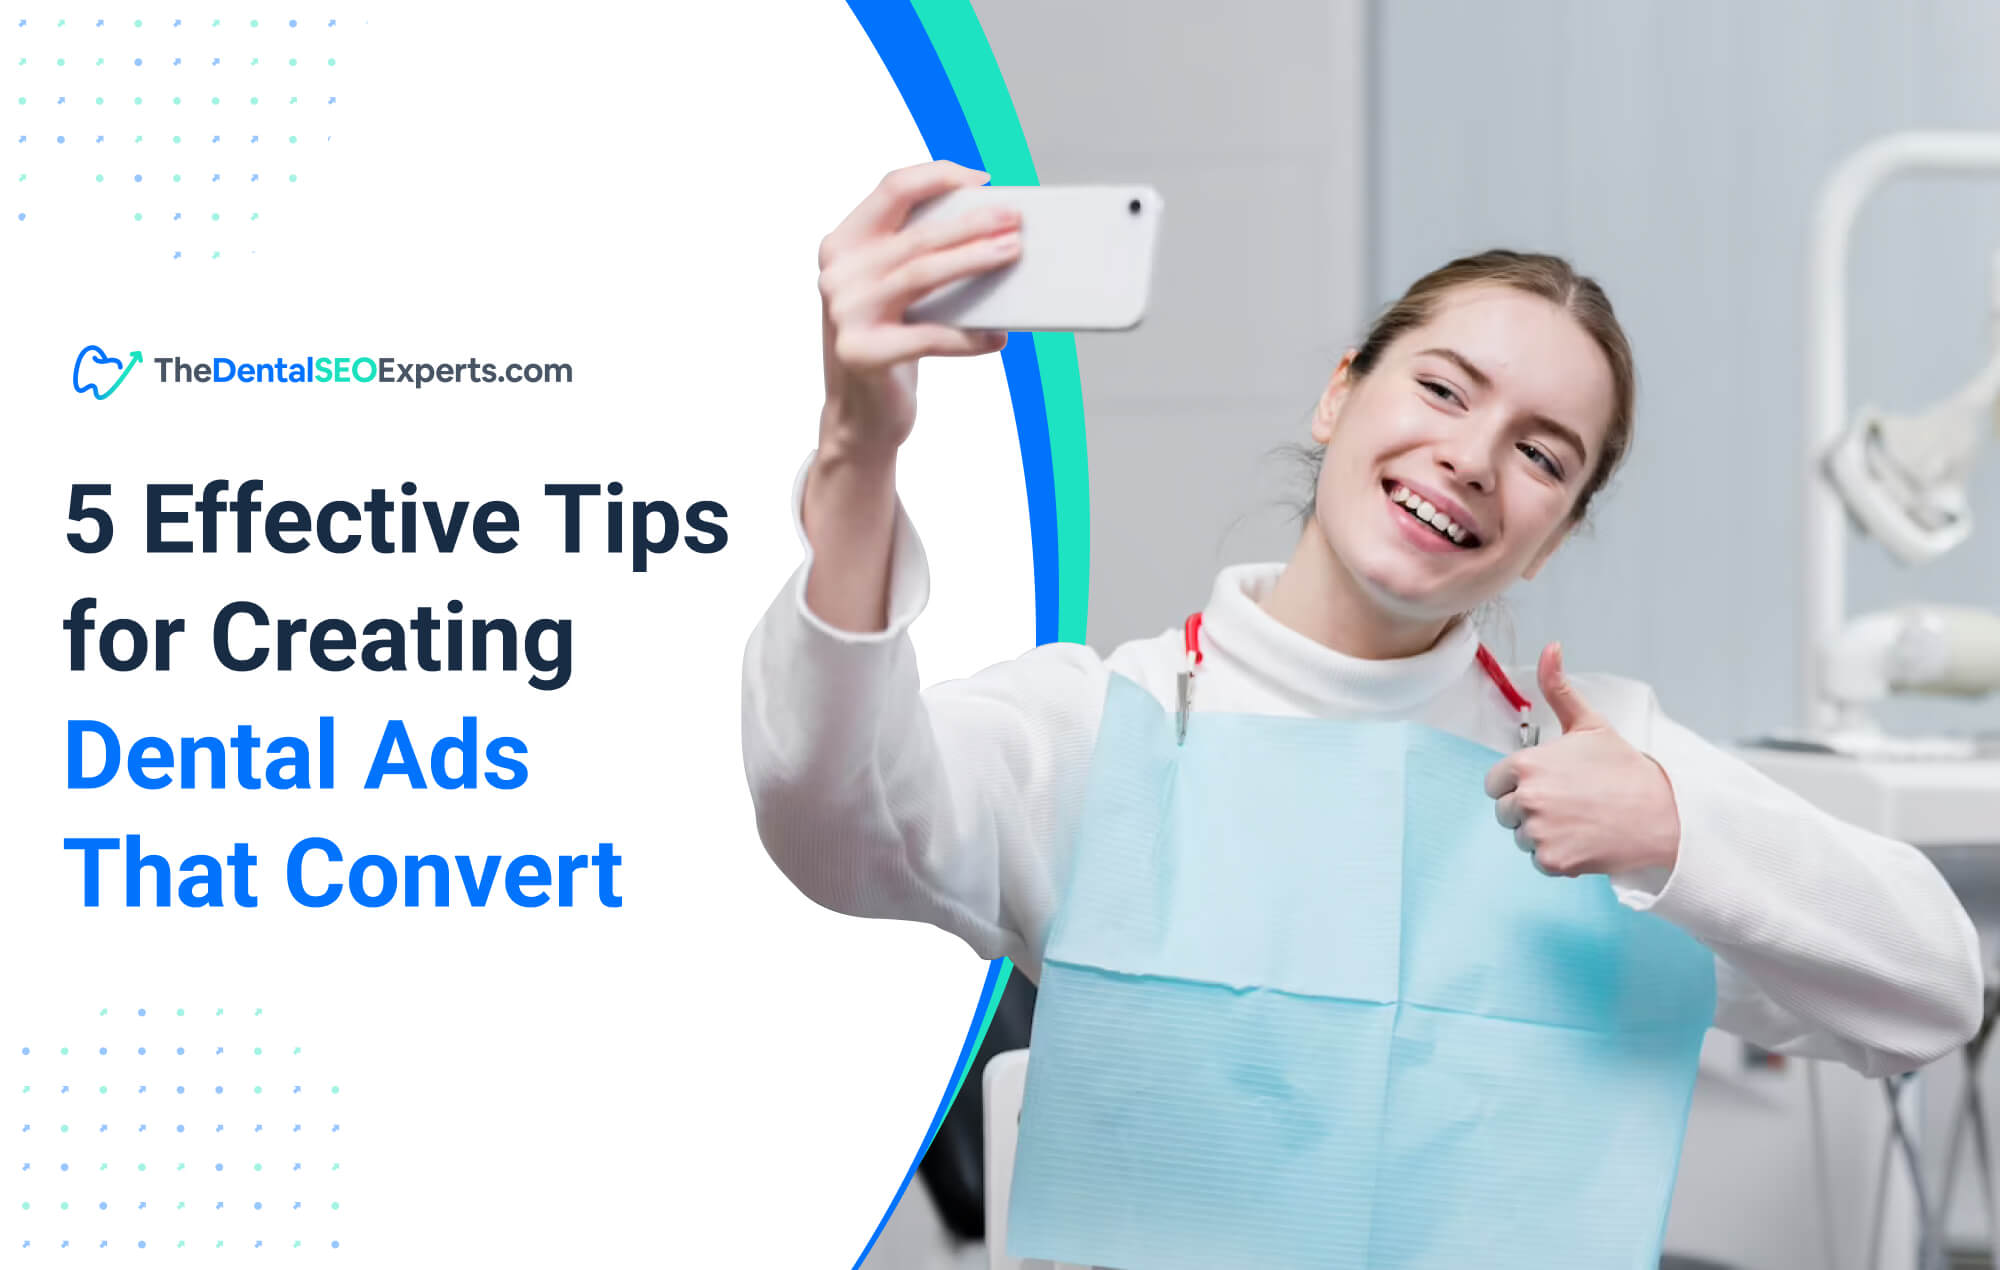 5 Effective Tips for Creating Dental Ads That Convert